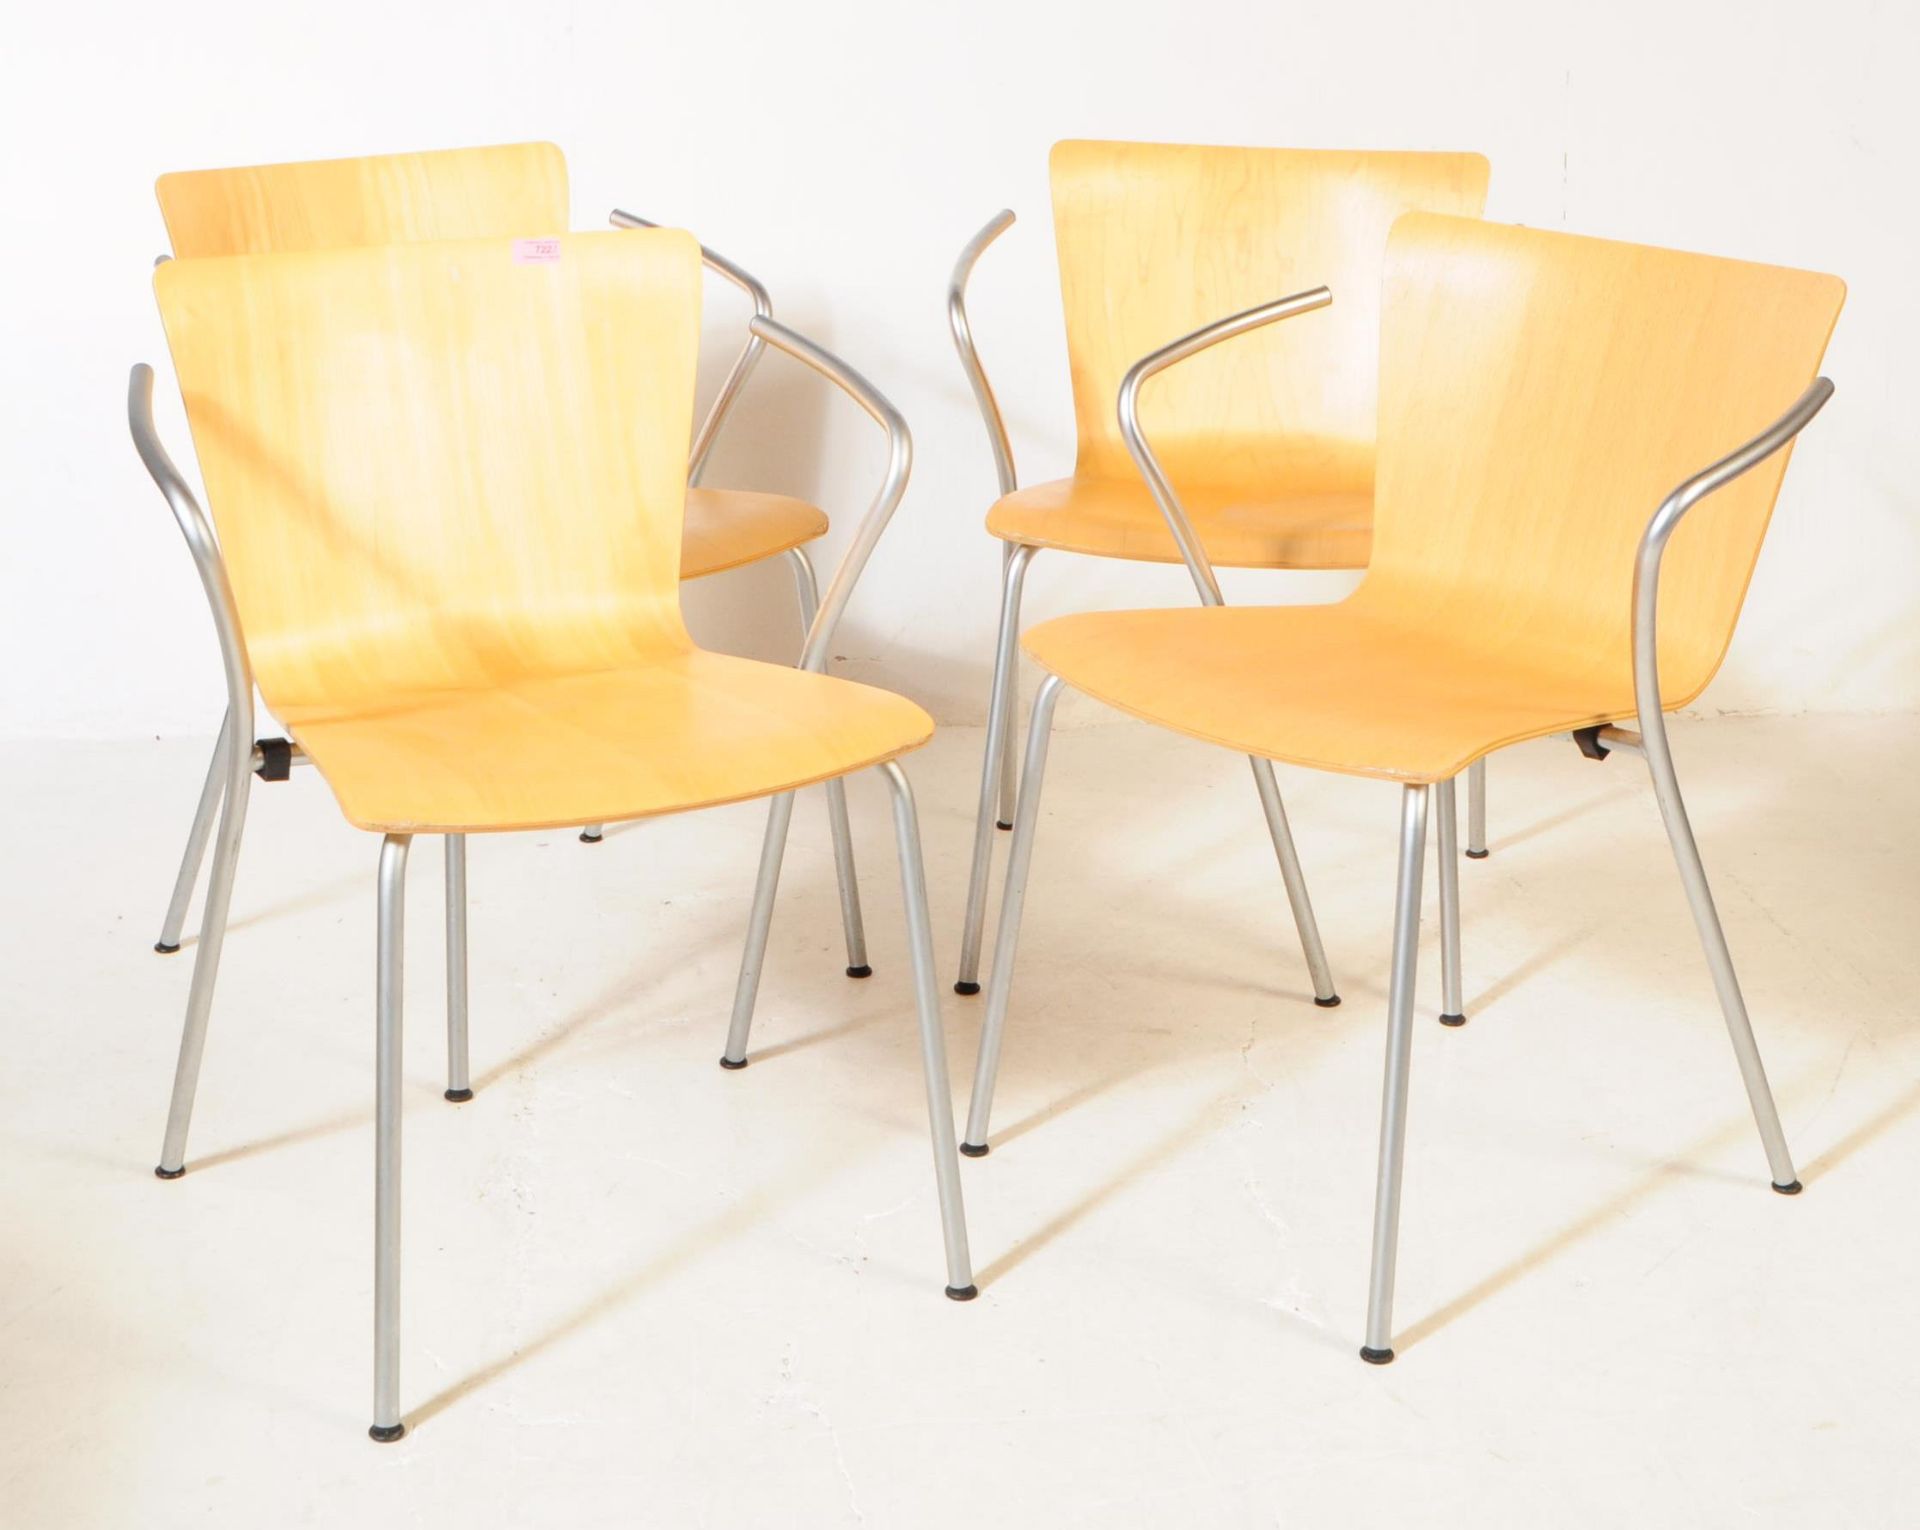 VICO MAGISTRETTI FOR FRITZ HANSEN - FOUR 20TH CENTURY DUO STACKING DINING CHAIRS